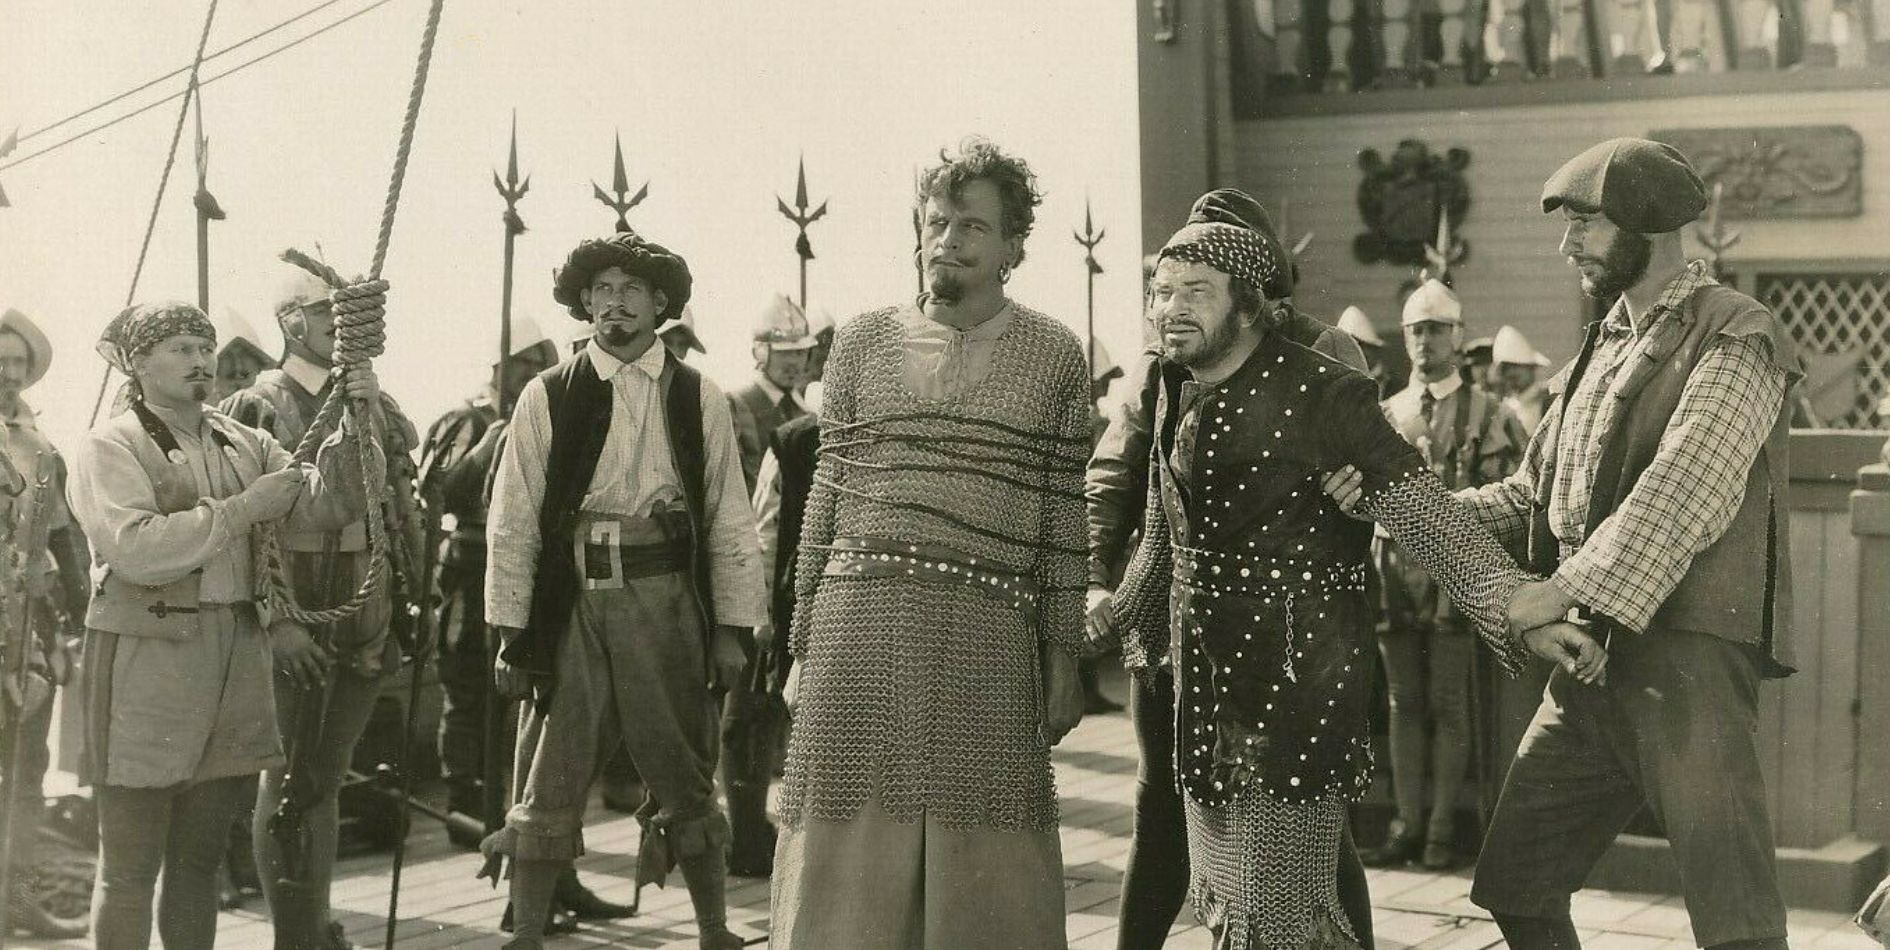 Men held by pirates on the deck of a ship in The Sea Hawk silent movie of 1924